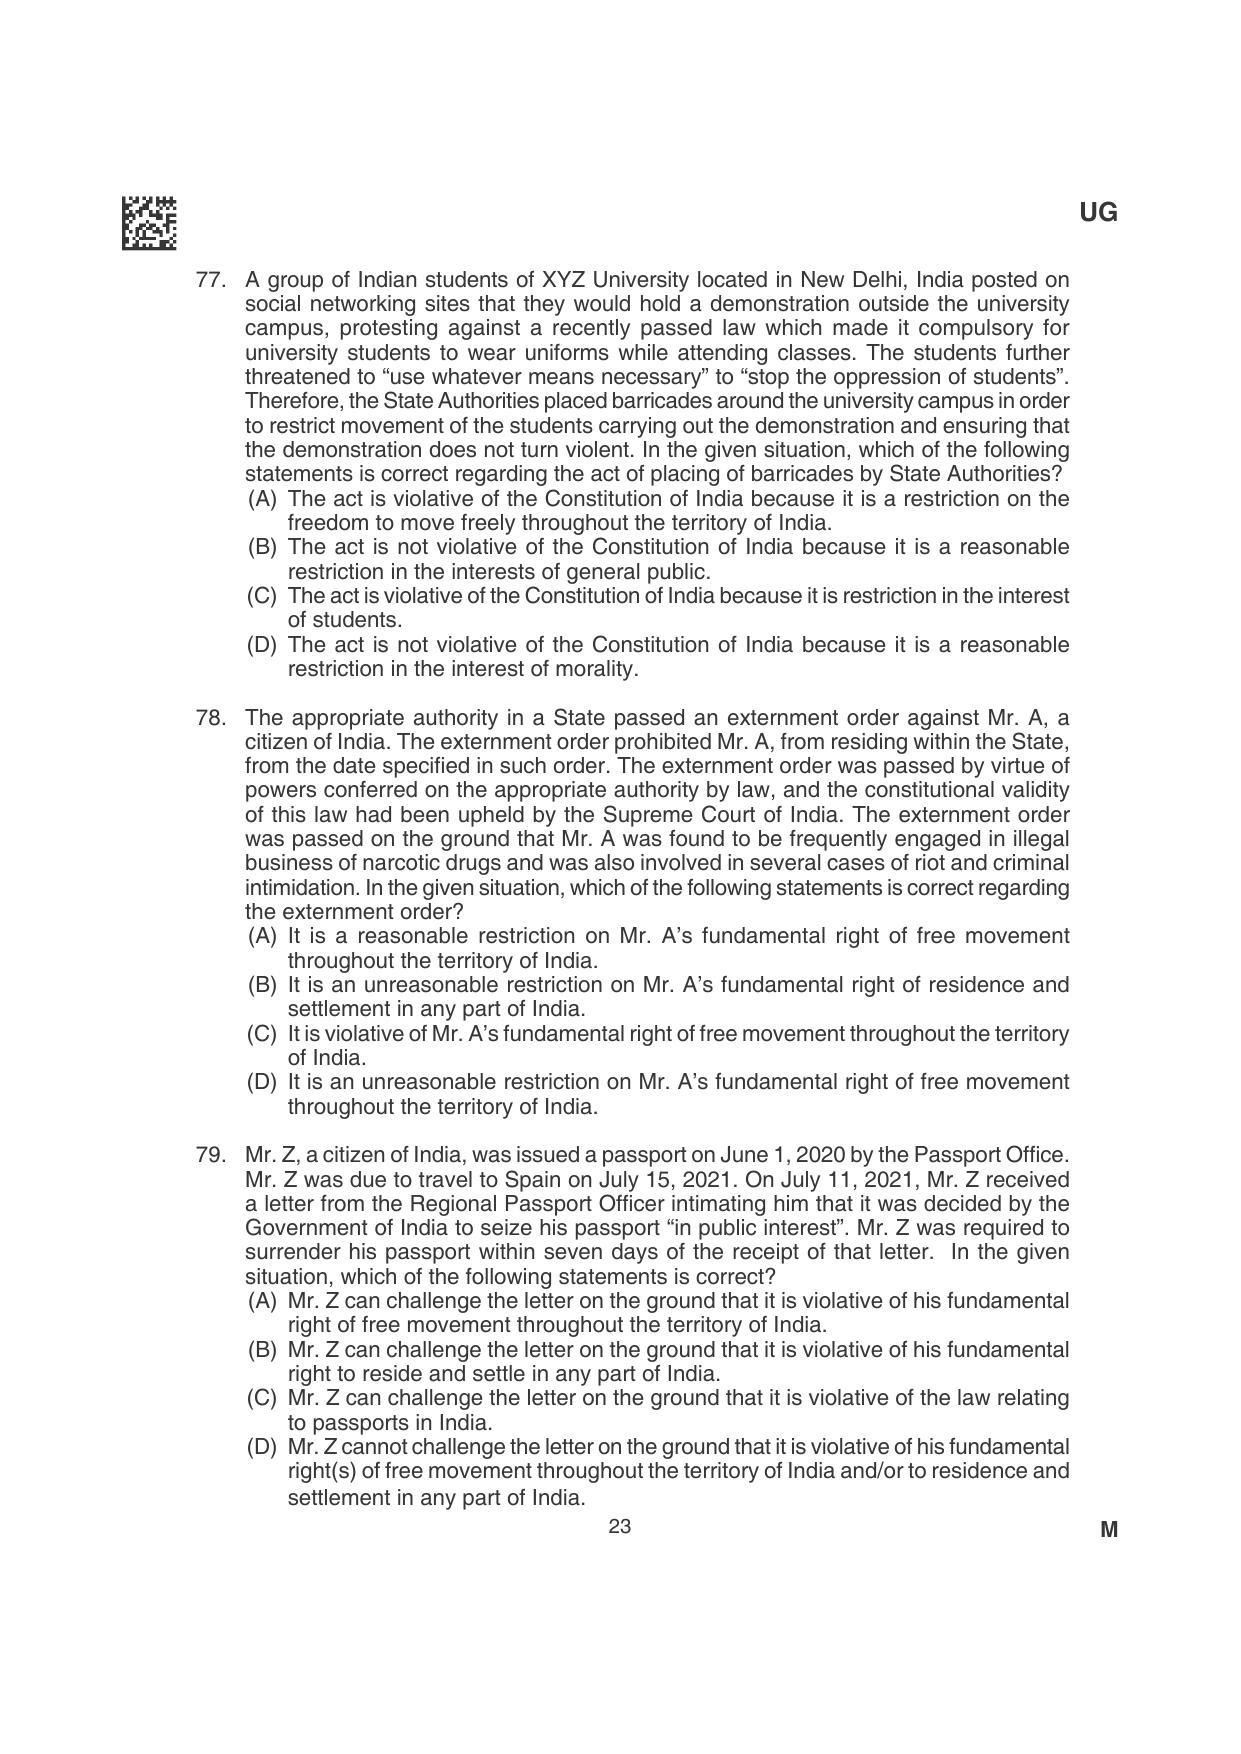 CLAT 2022 UG Question Papers - Page 23